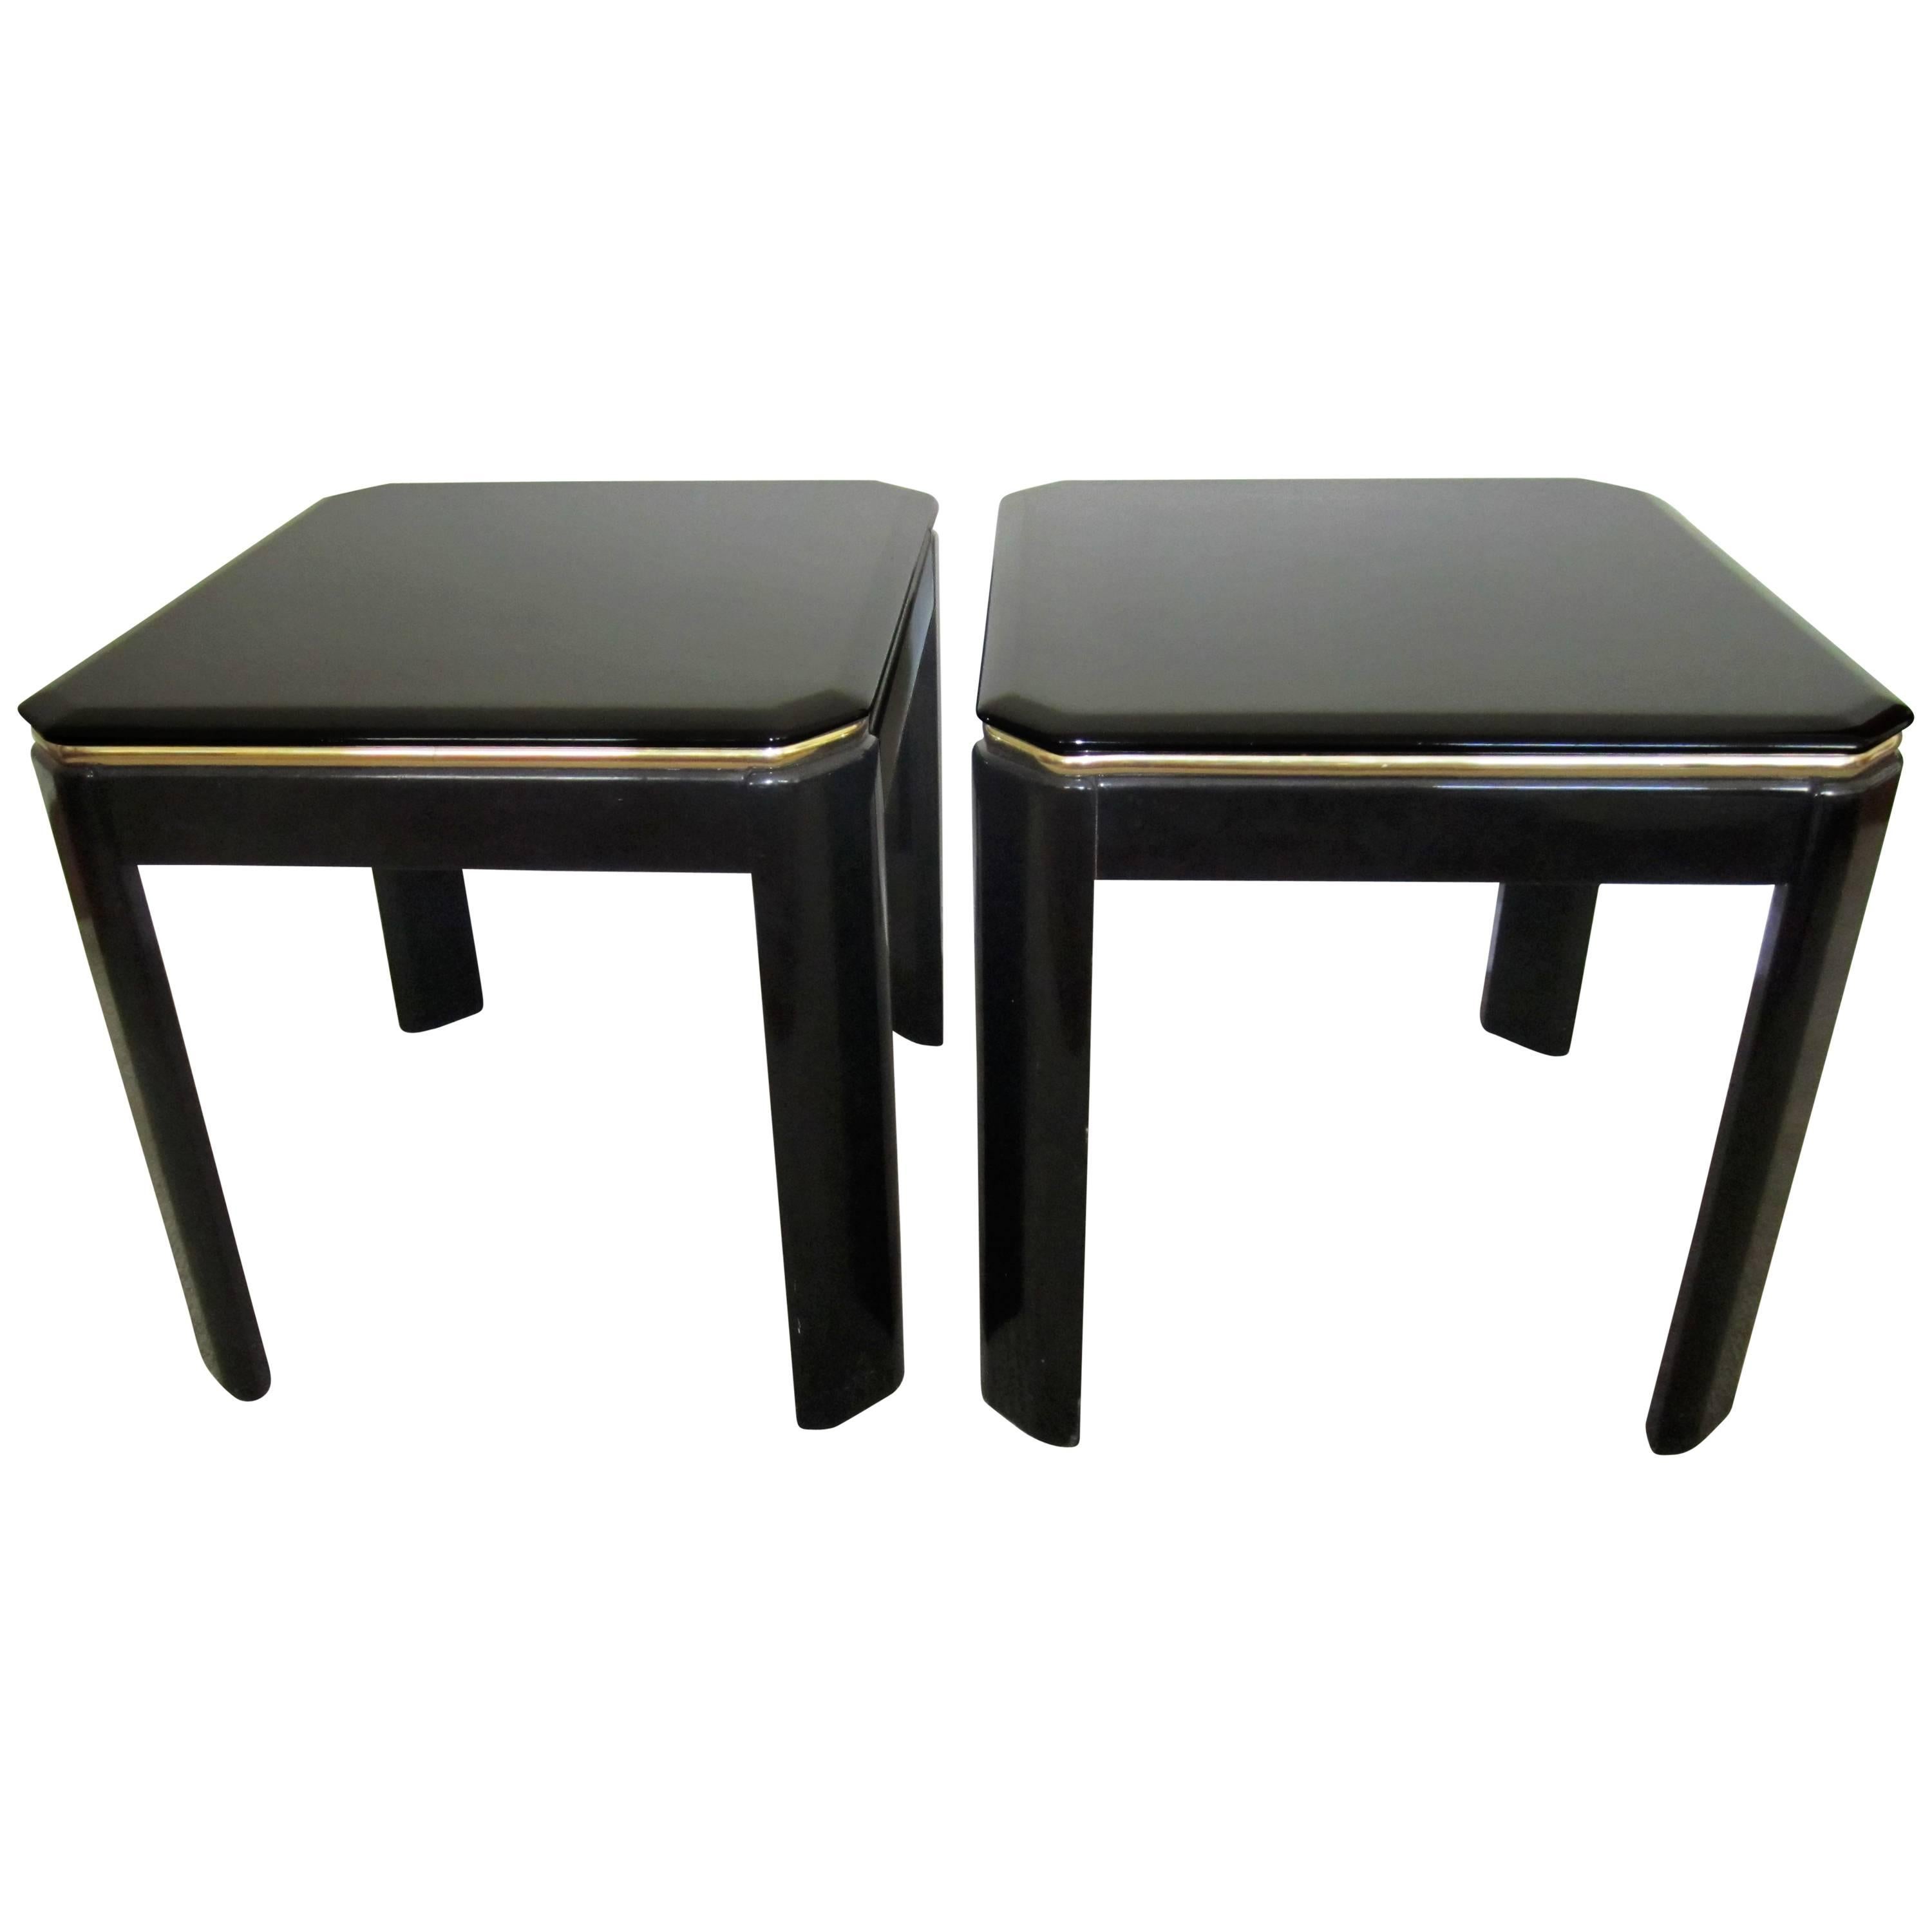 Pair Vintage Square Black Lacquer and Brass End Tables